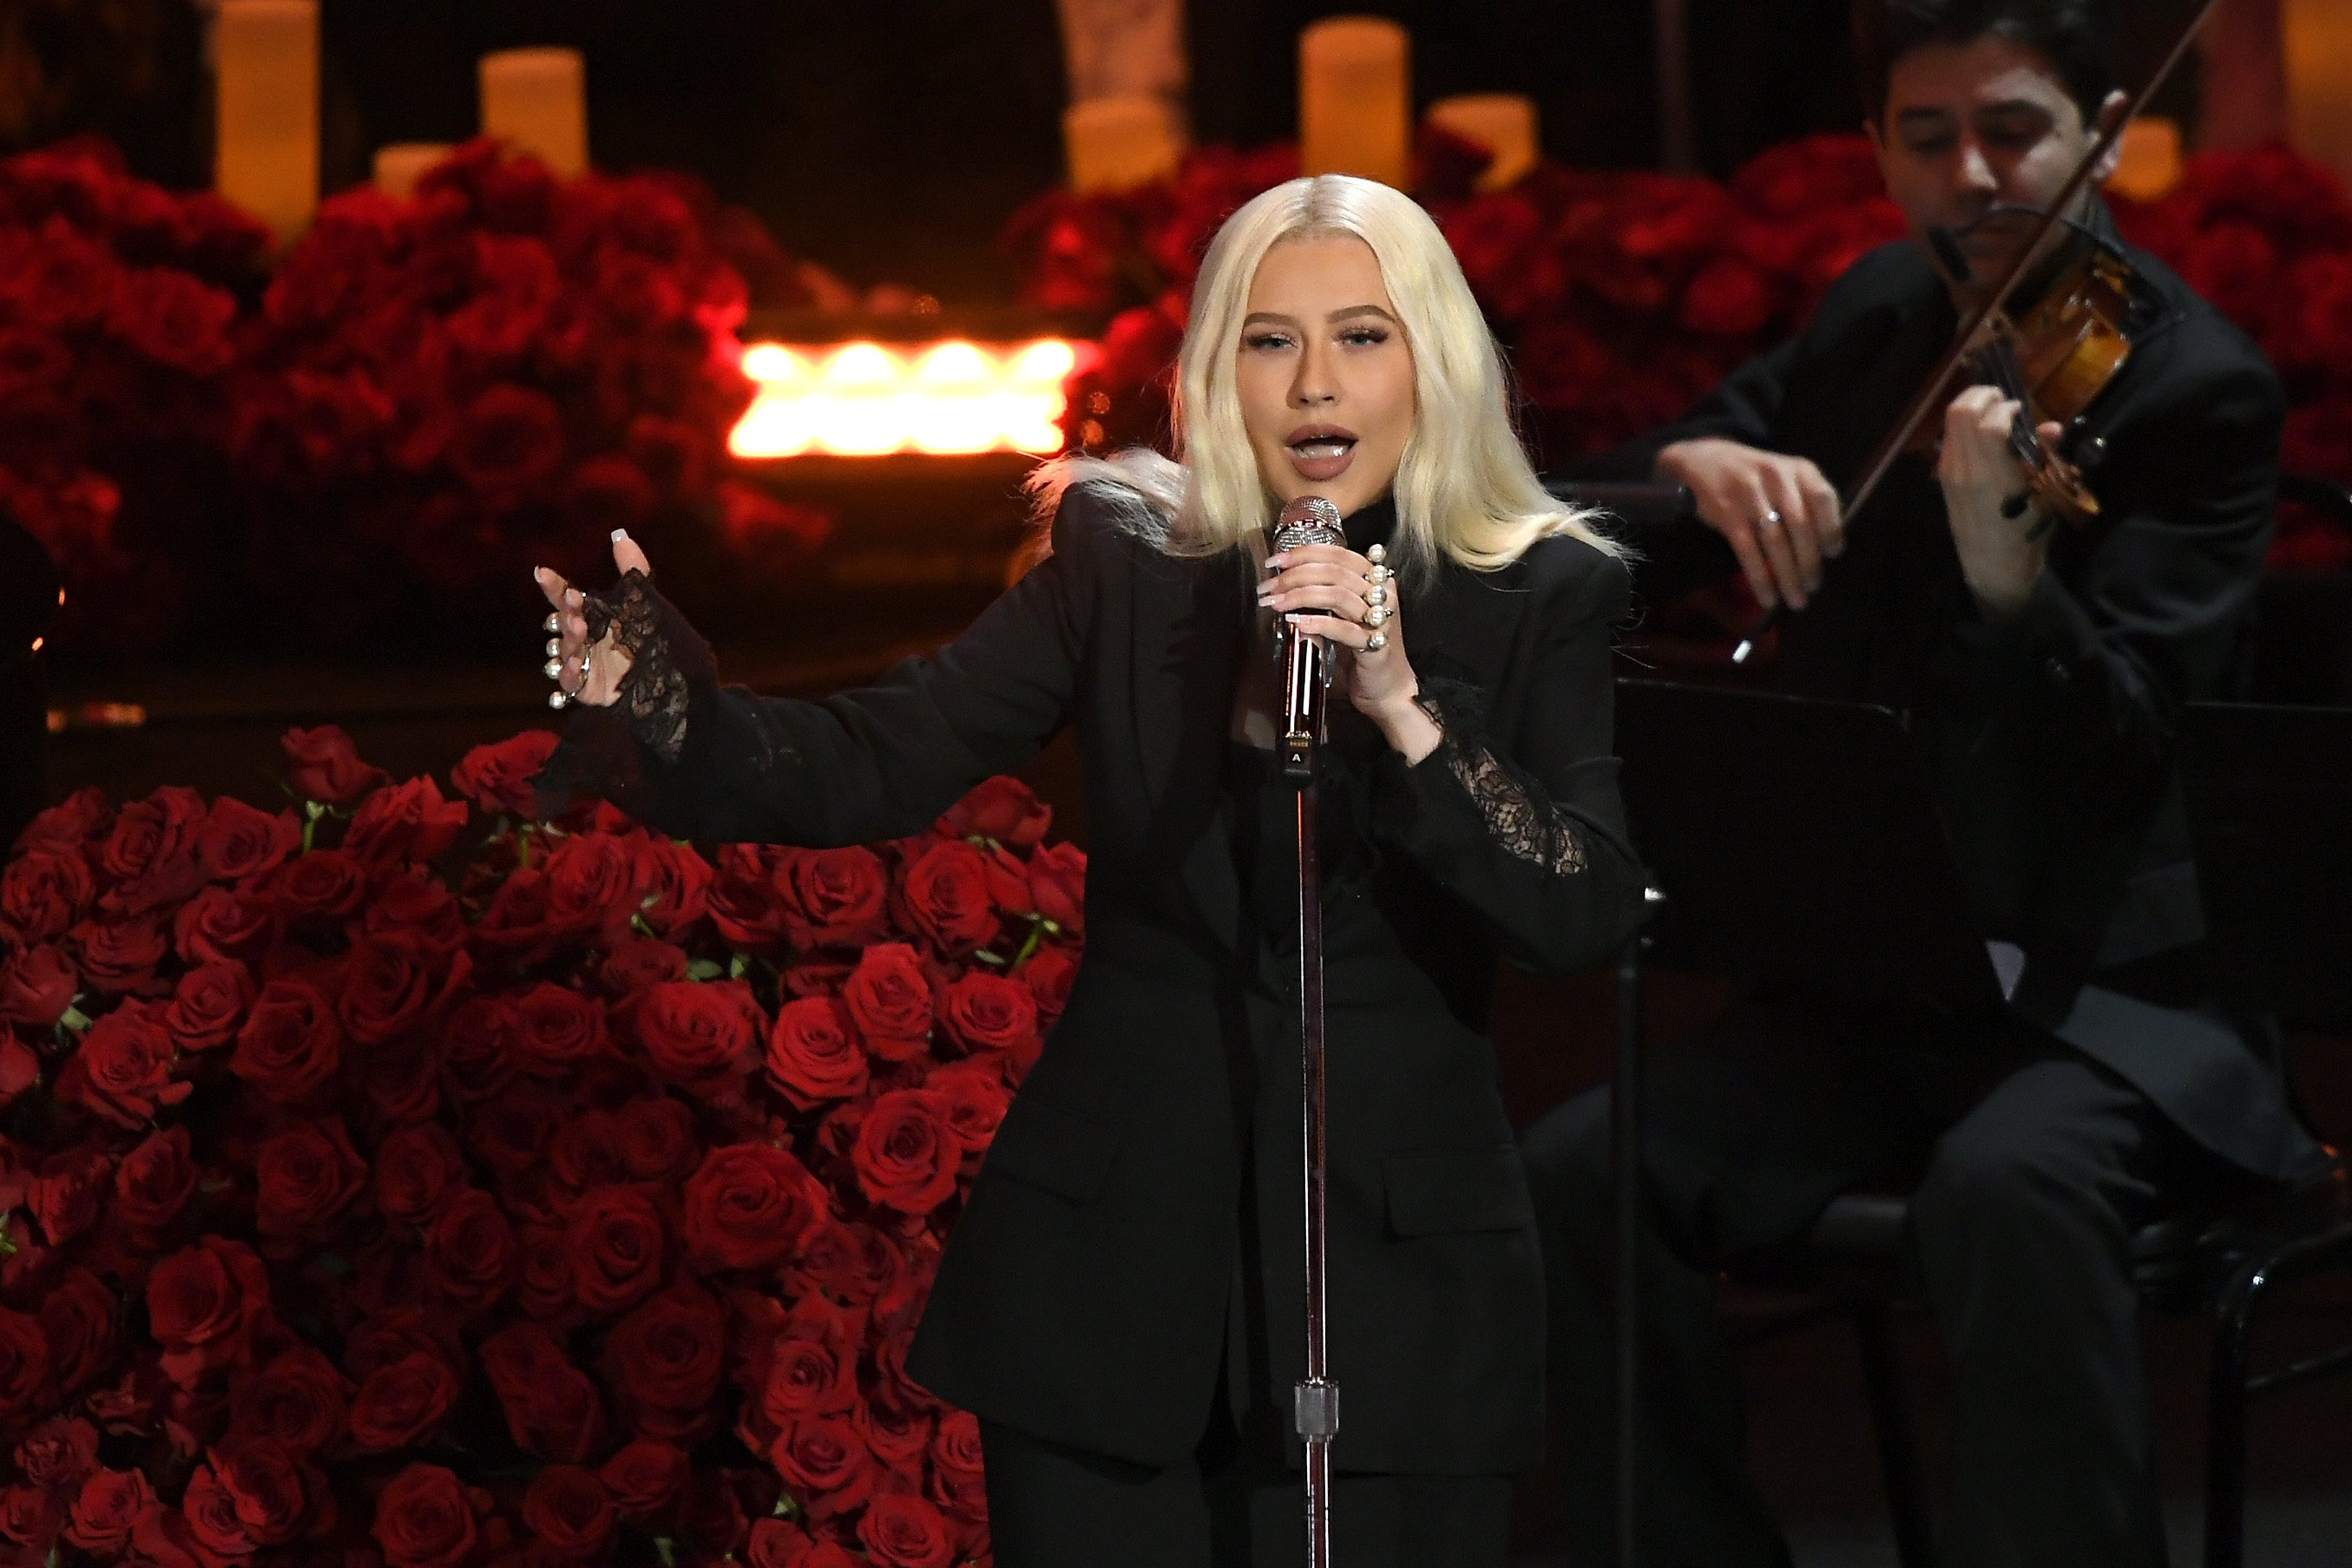 Christina Aguilera performs during The Celebration of Life for Kobe & Gianna Bryant at Staples Center on February 24, 2020 | Photo: Getty Images